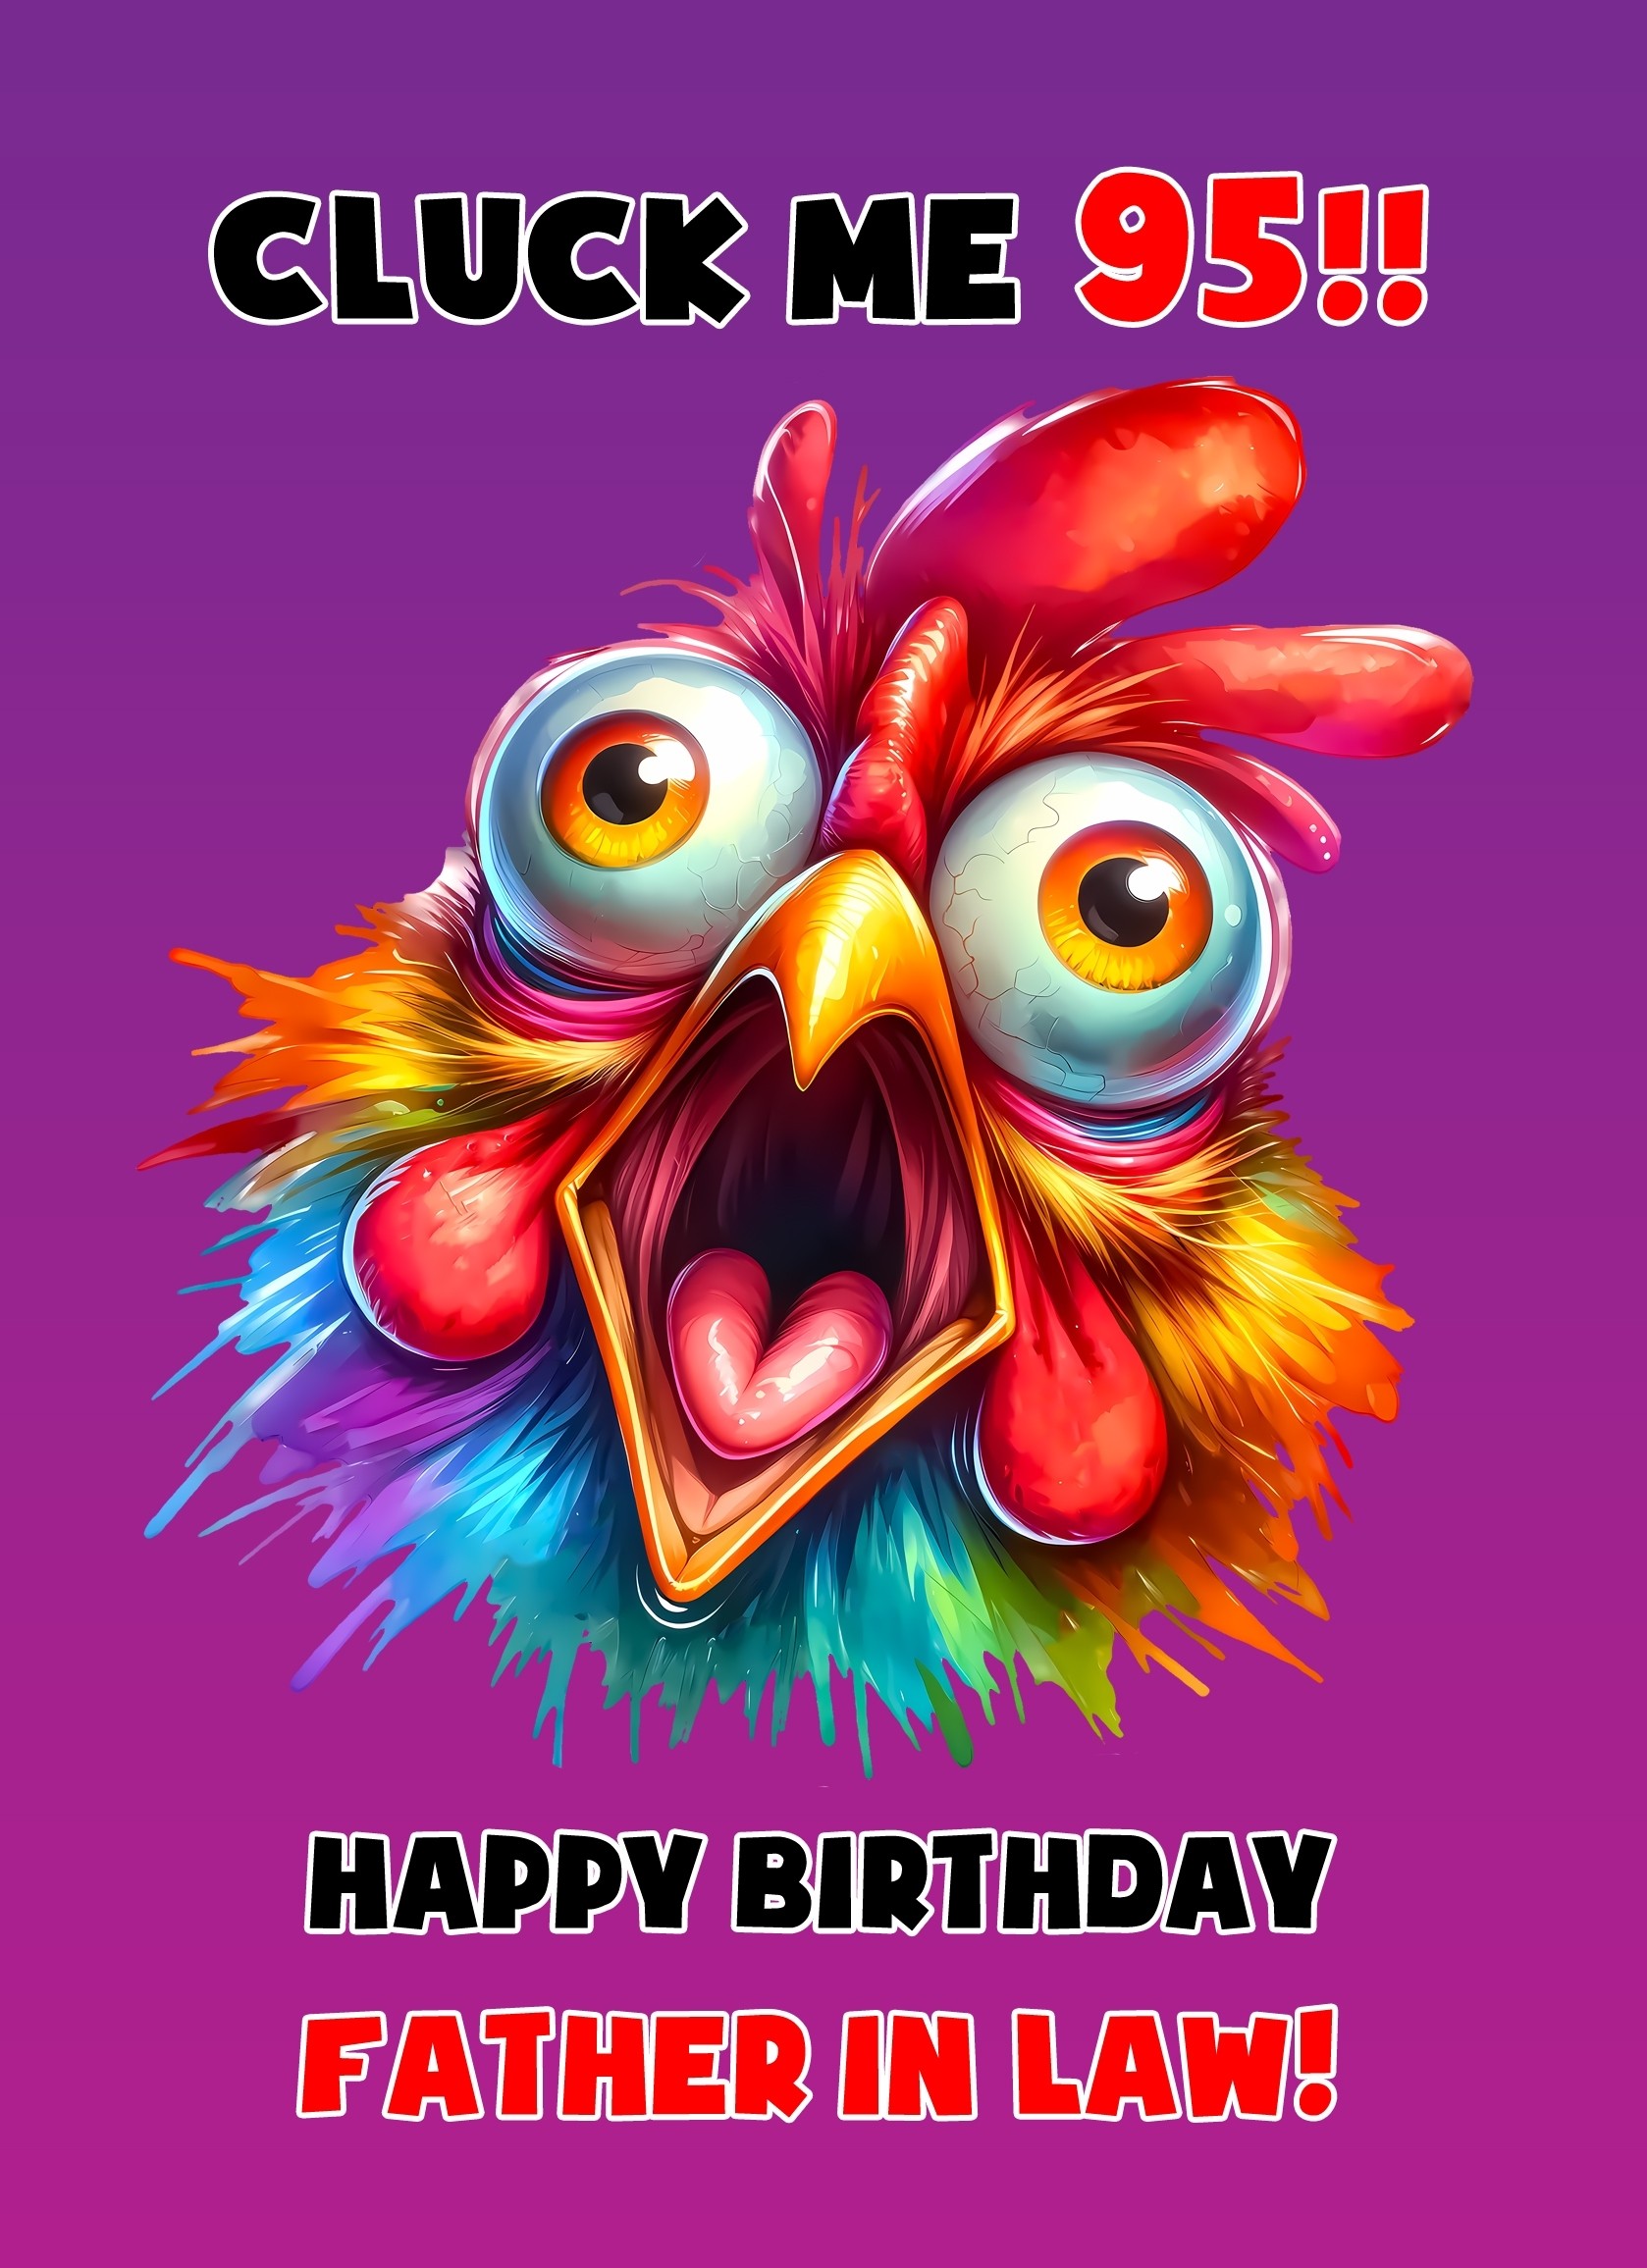 Father in Law 95th Birthday Card (Funny Shocked Chicken Humour)